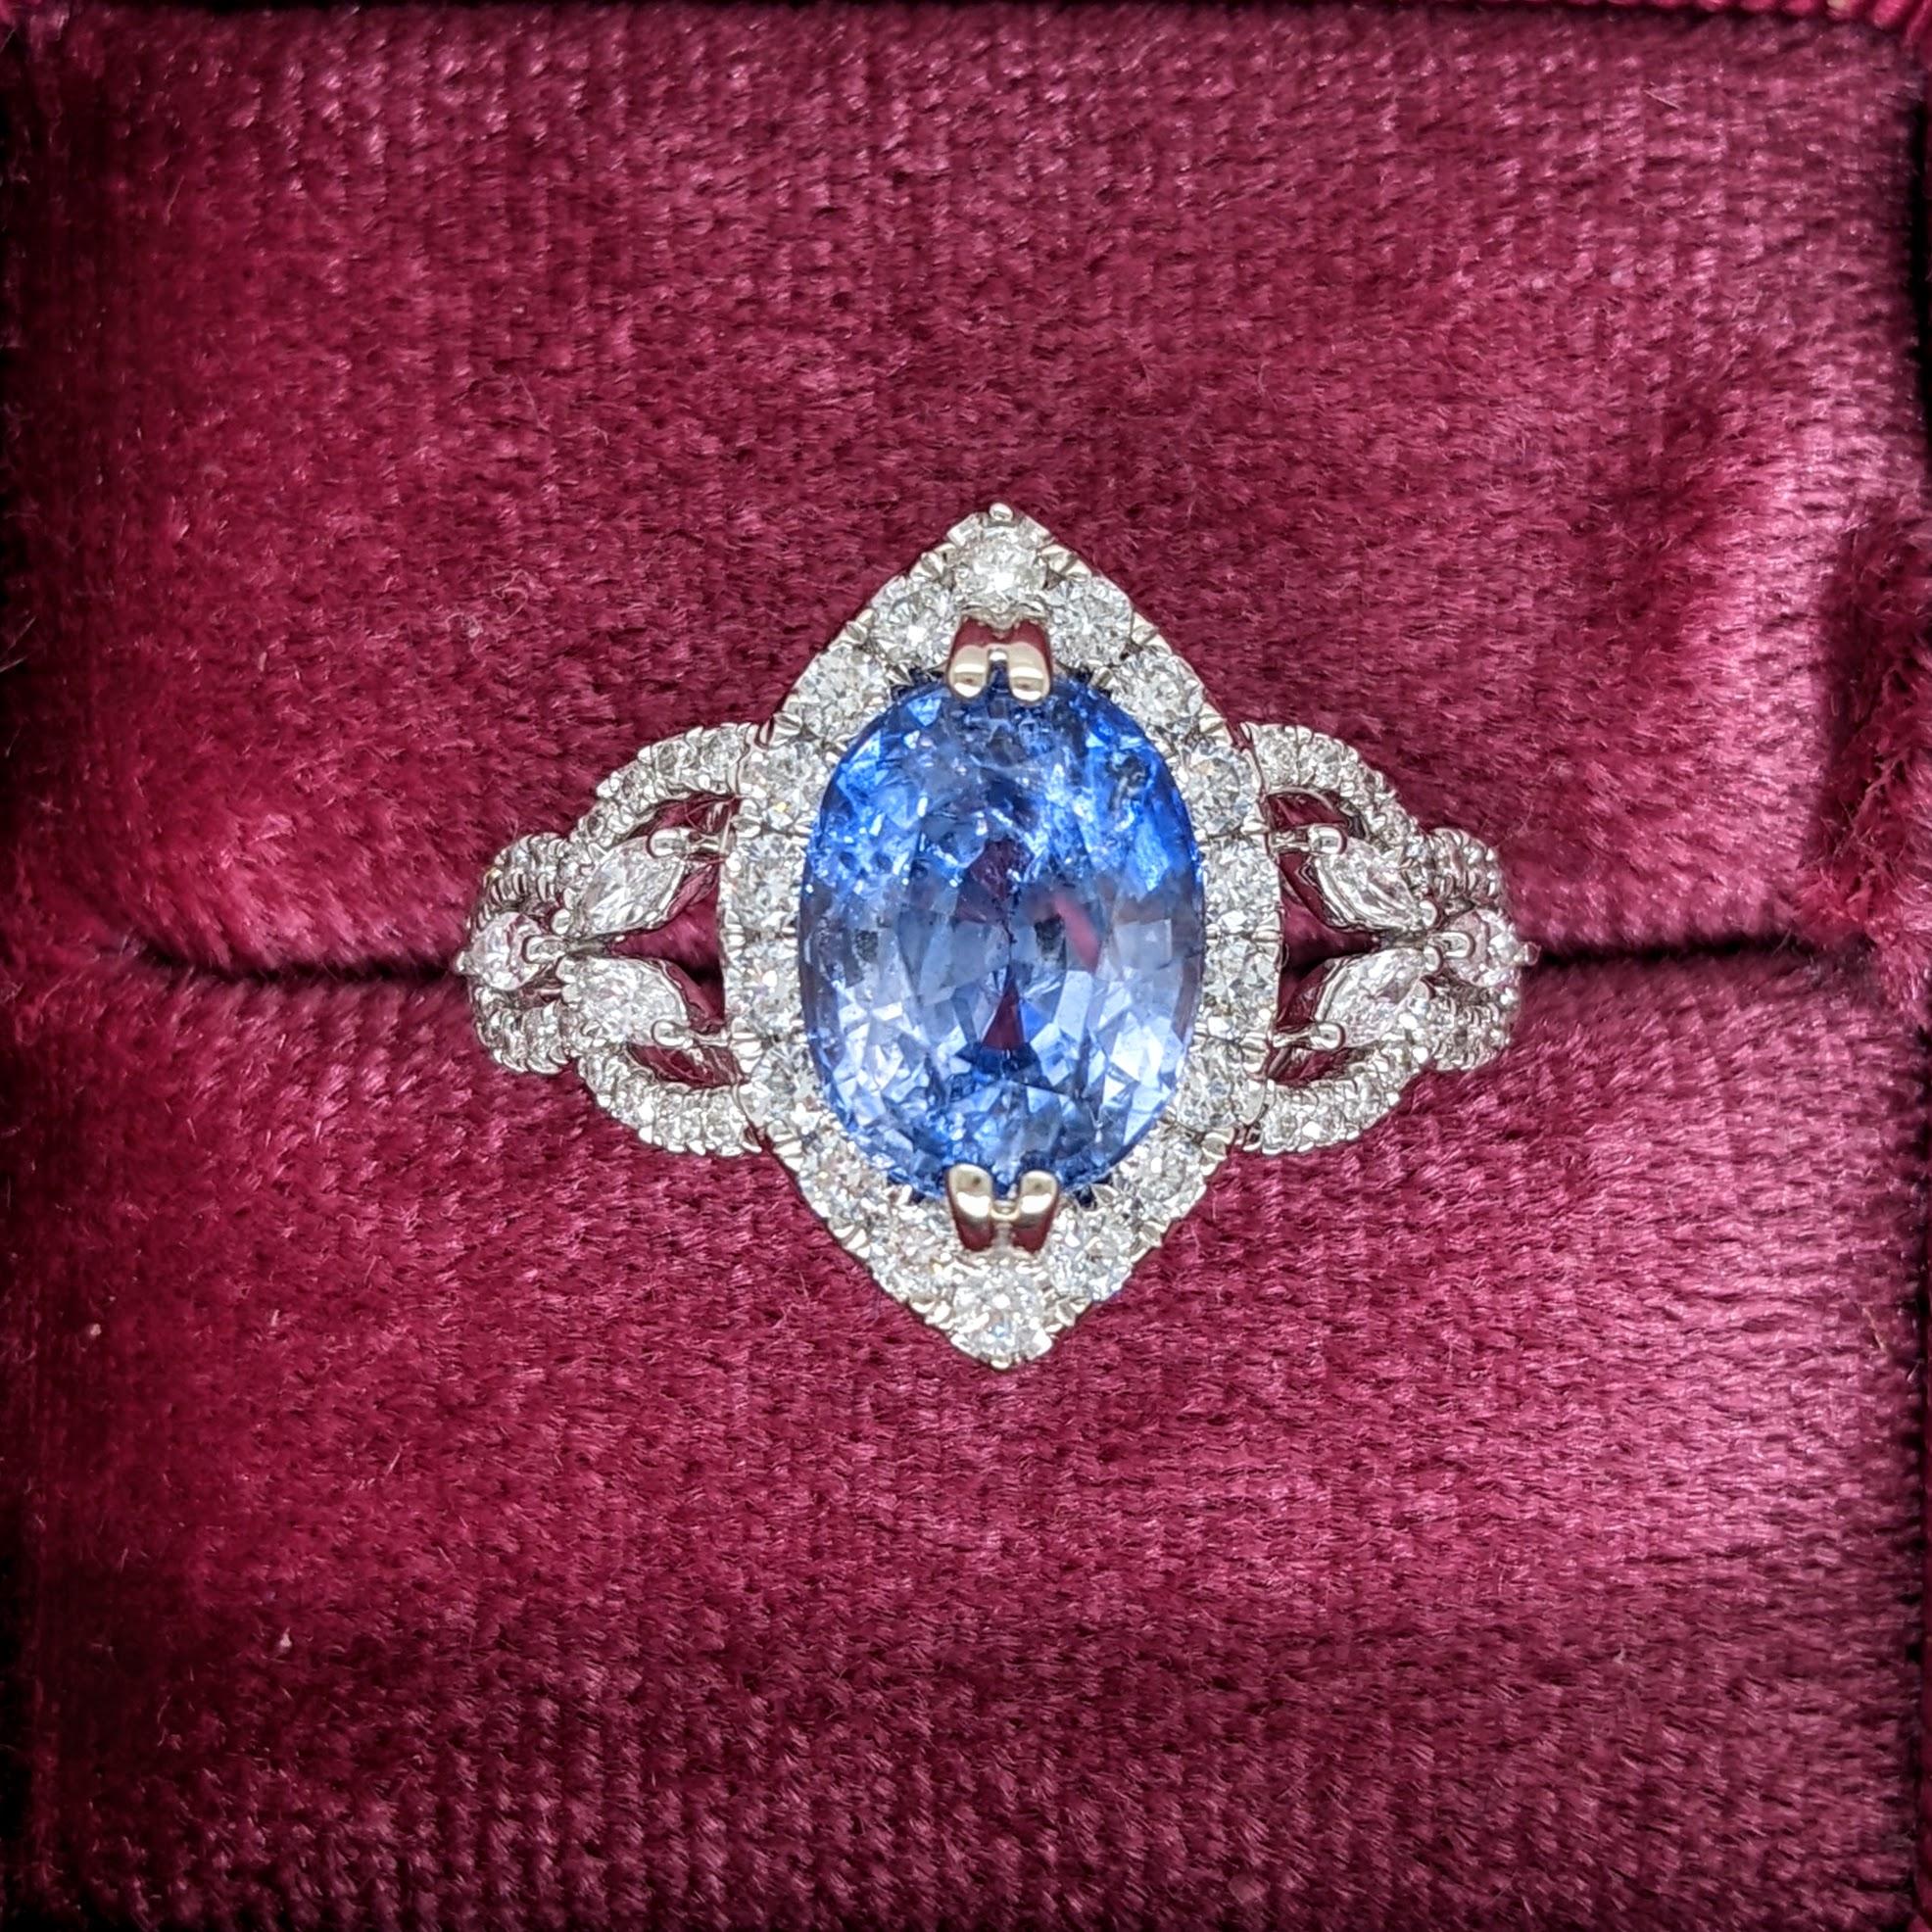 Oval Cut Earth Mined 3.64ct Ceylon Sapphire Ring in 14K White Gold w Diamond Accents